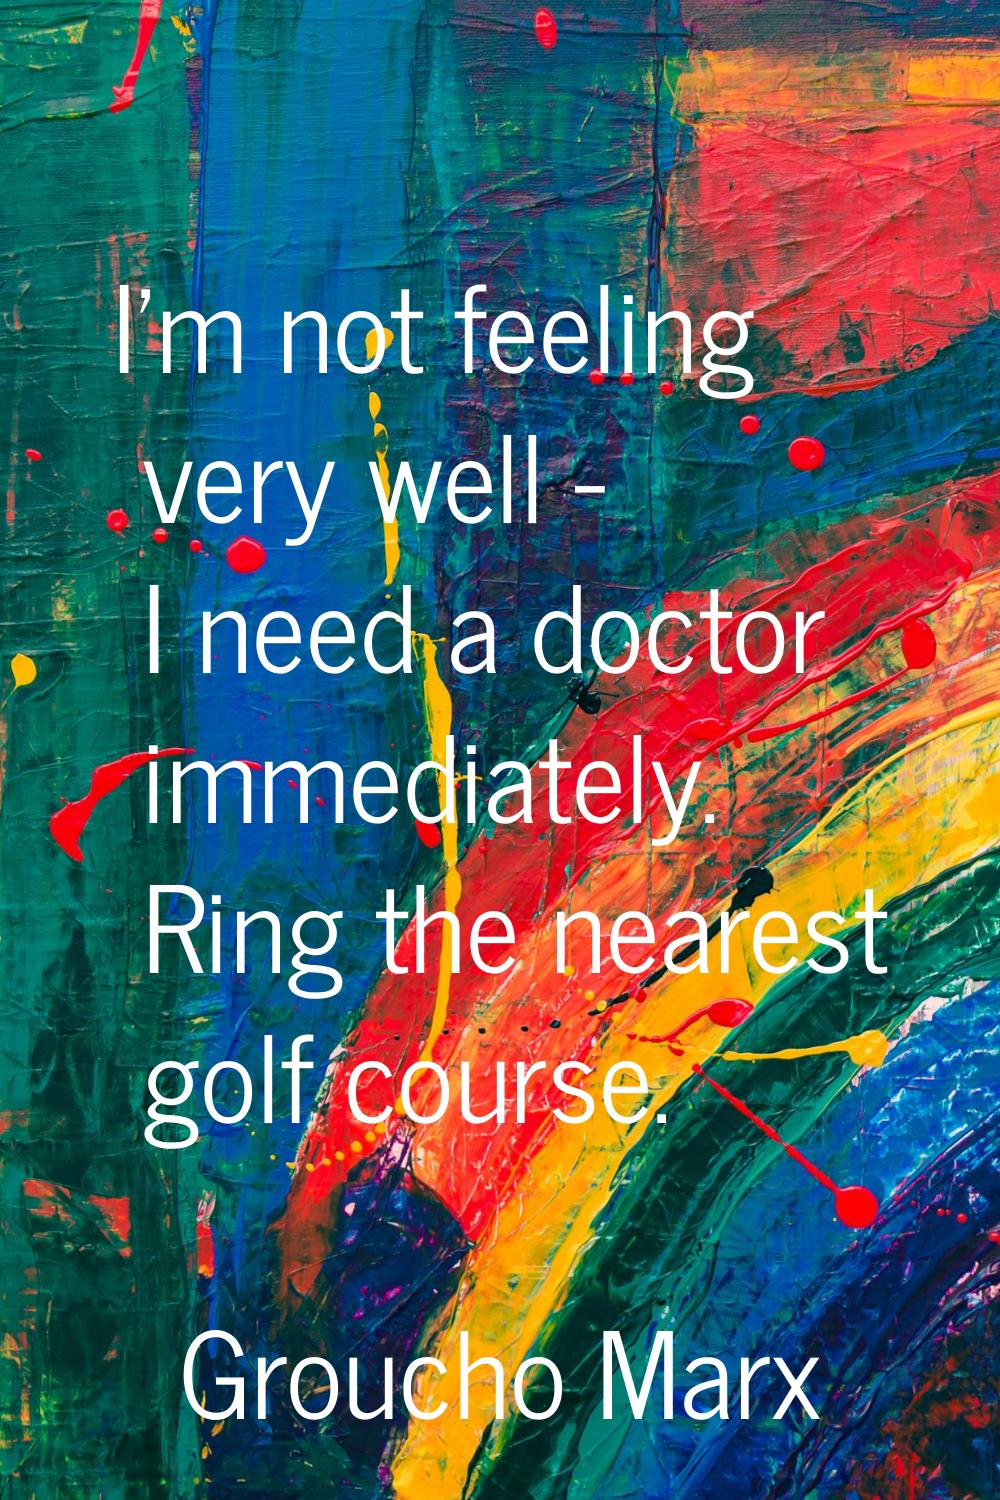 I'm not feeling very well - I need a doctor immediately. Ring the nearest golf course.